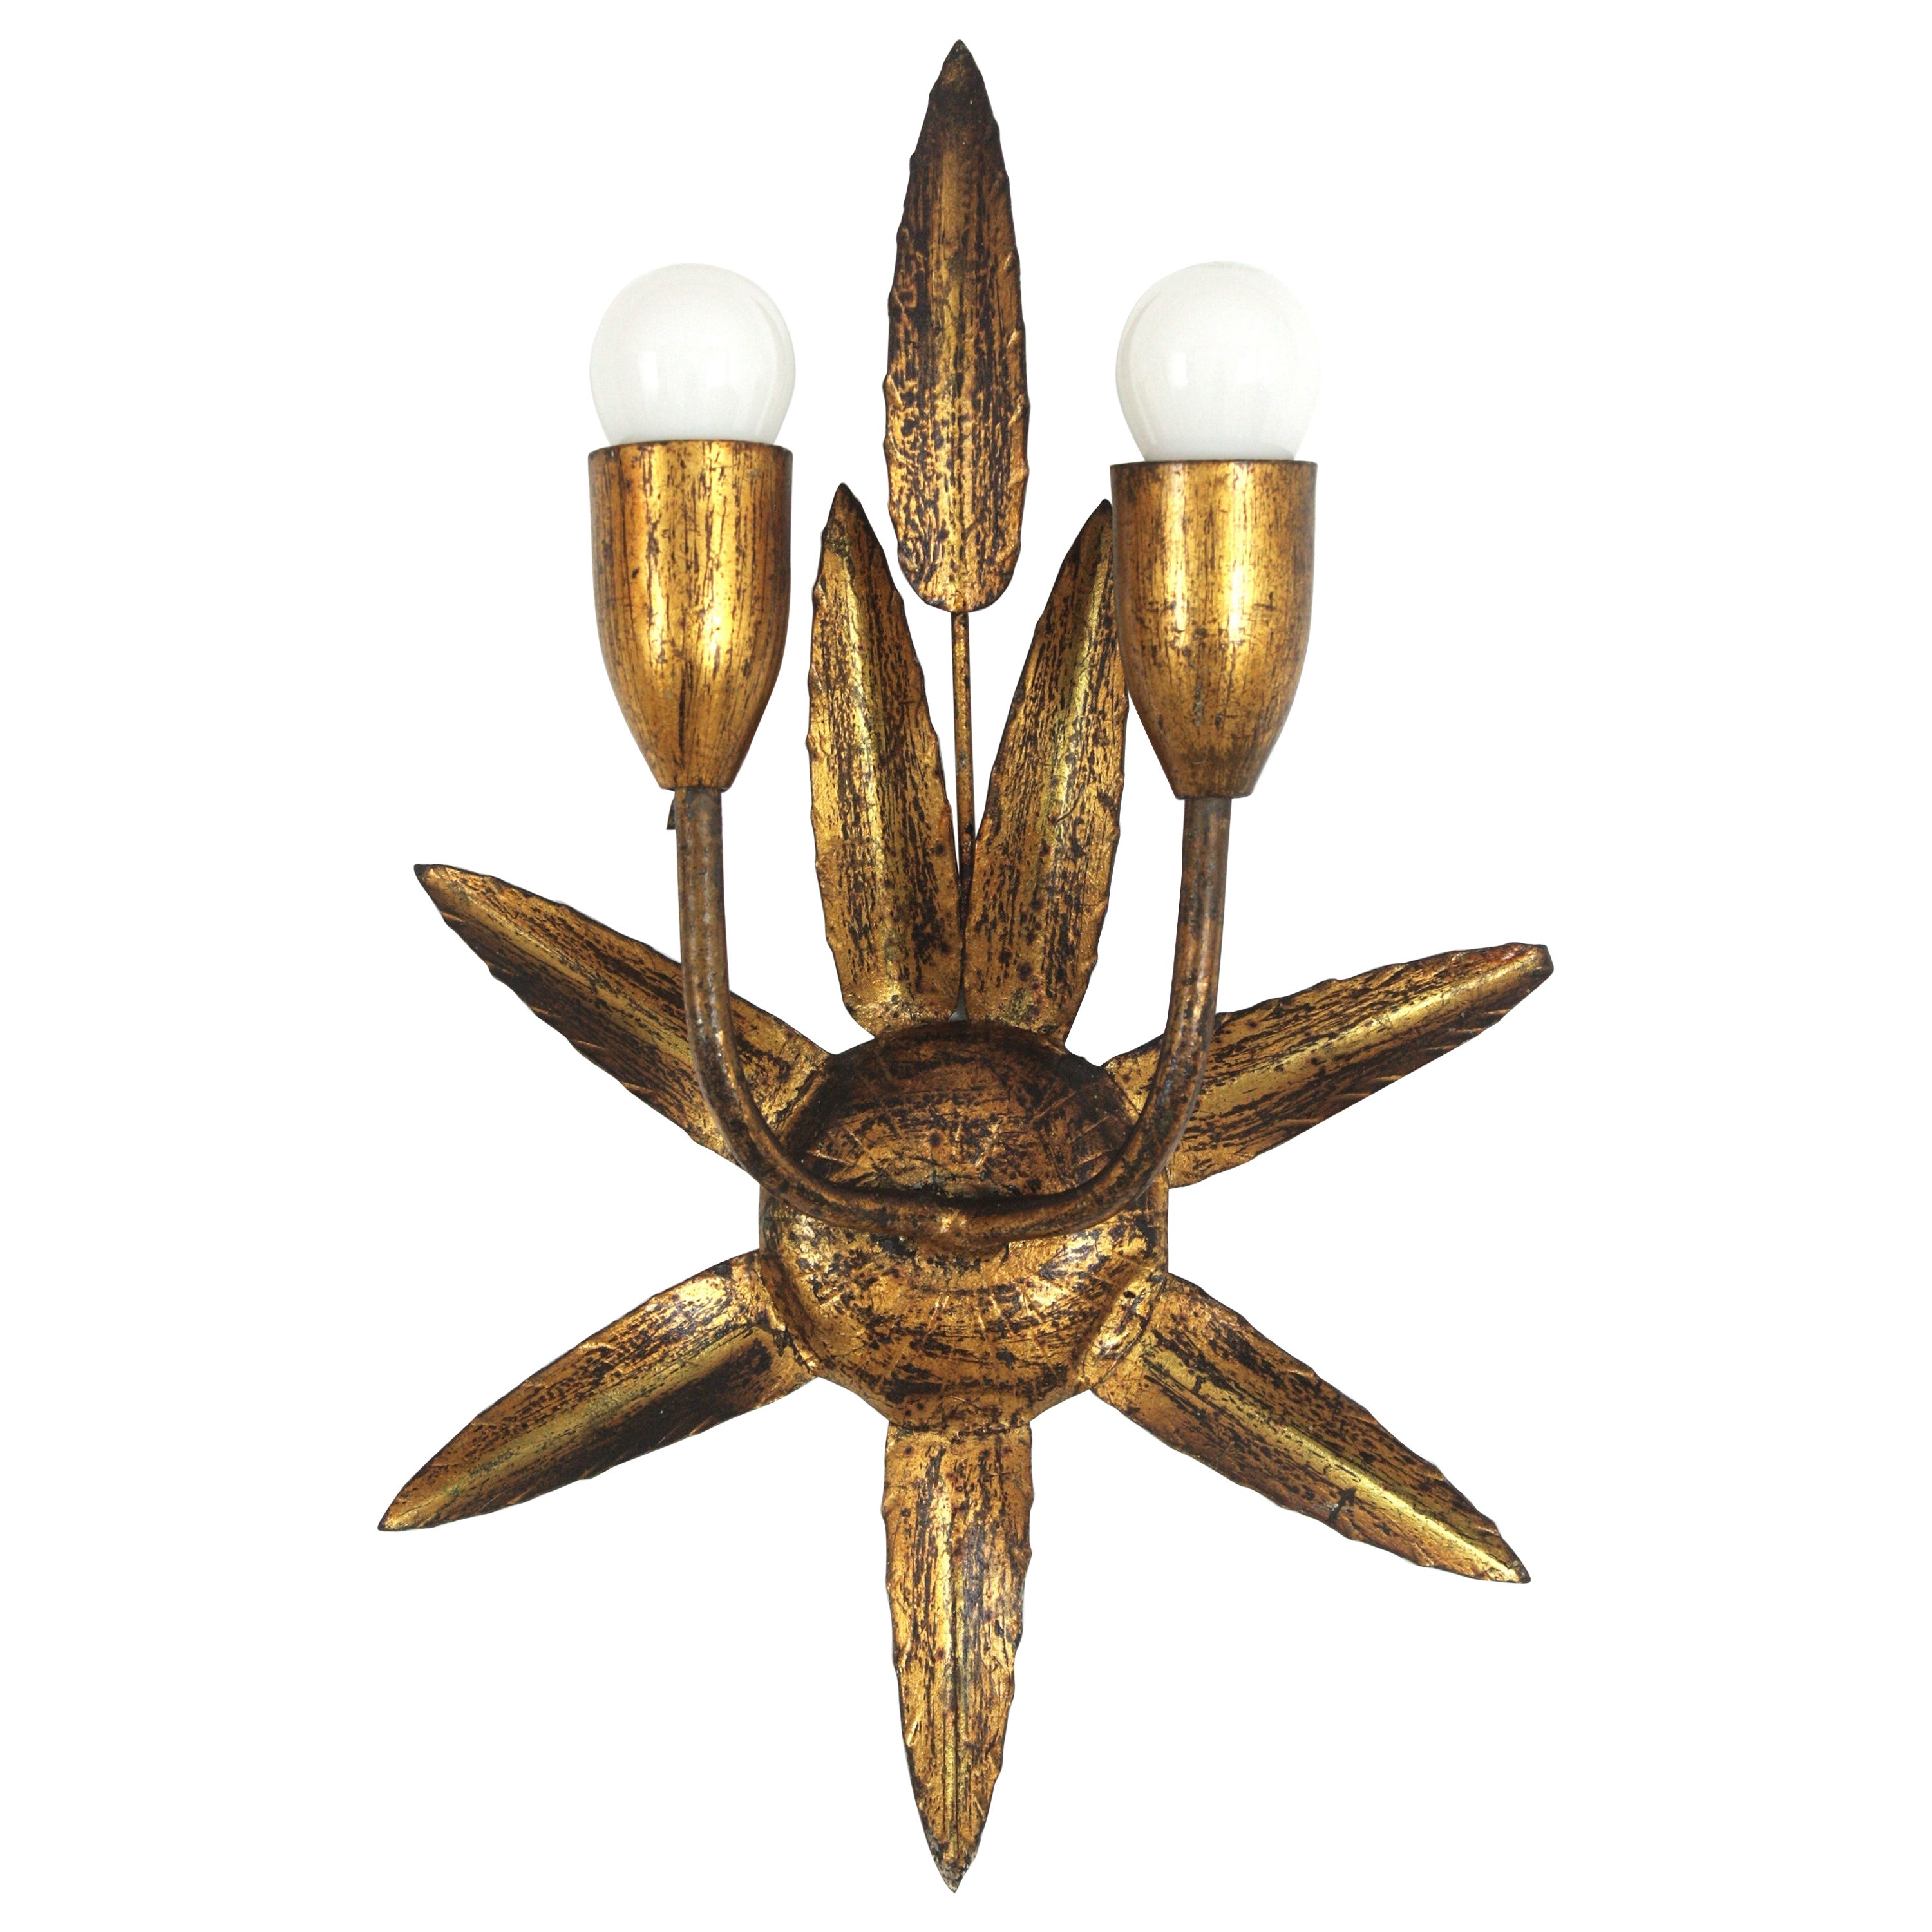 Spanish Gilt Iron Wall Sconce with Foliage Design and Starburst Backplate, 1950s